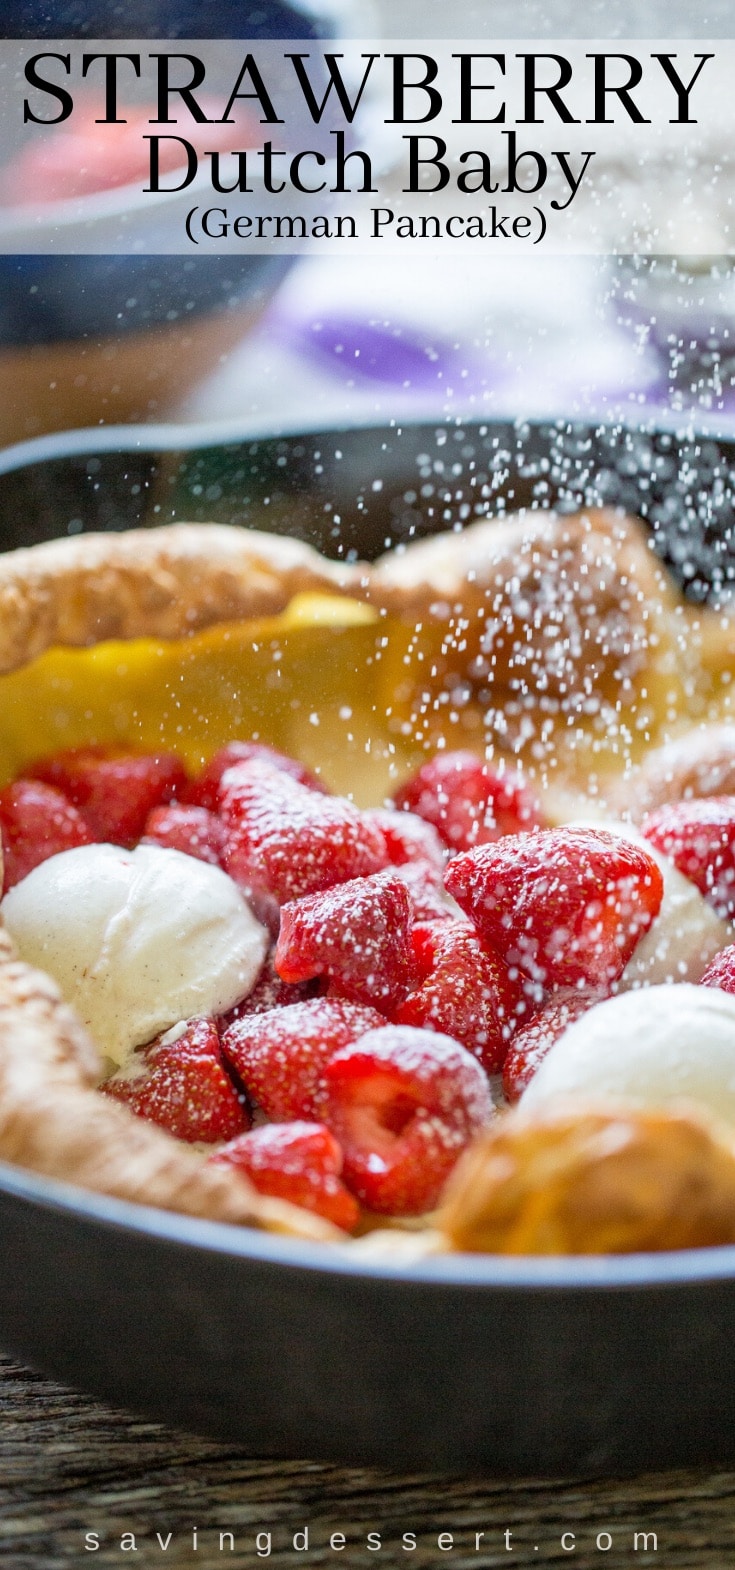 A cast iron skillet with a Dutch baby pancake filled with strawberries and ice cream